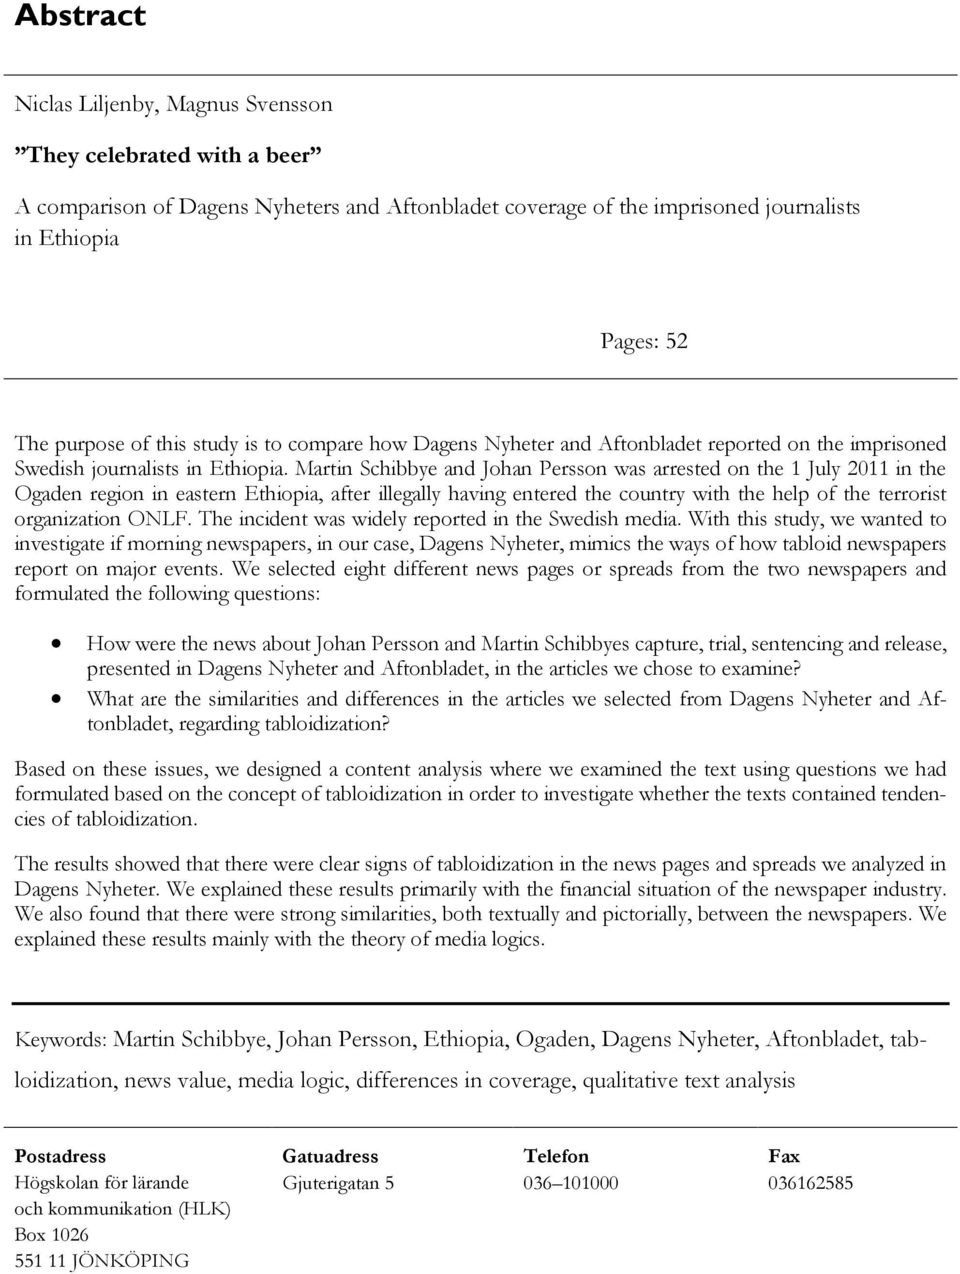 Martin Schibbye and Johan Persson was arrested on the 1 July 2011 in the Ogaden region in eastern Ethiopia, after illegally having entered the country with the help of the terrorist organization ONLF.